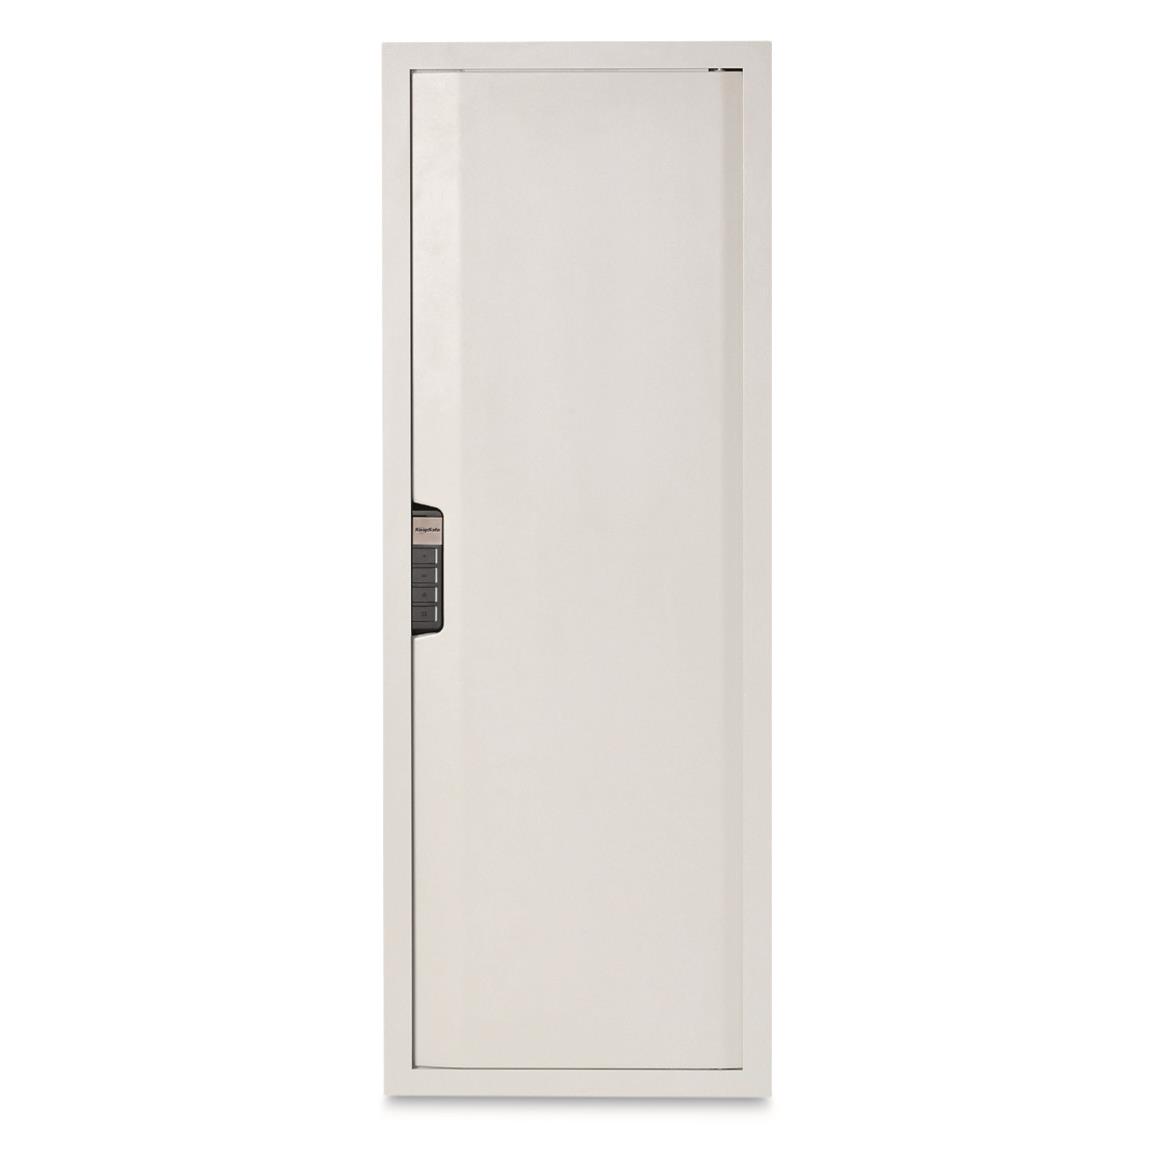 SnapSafe In-Wall Tall Safe